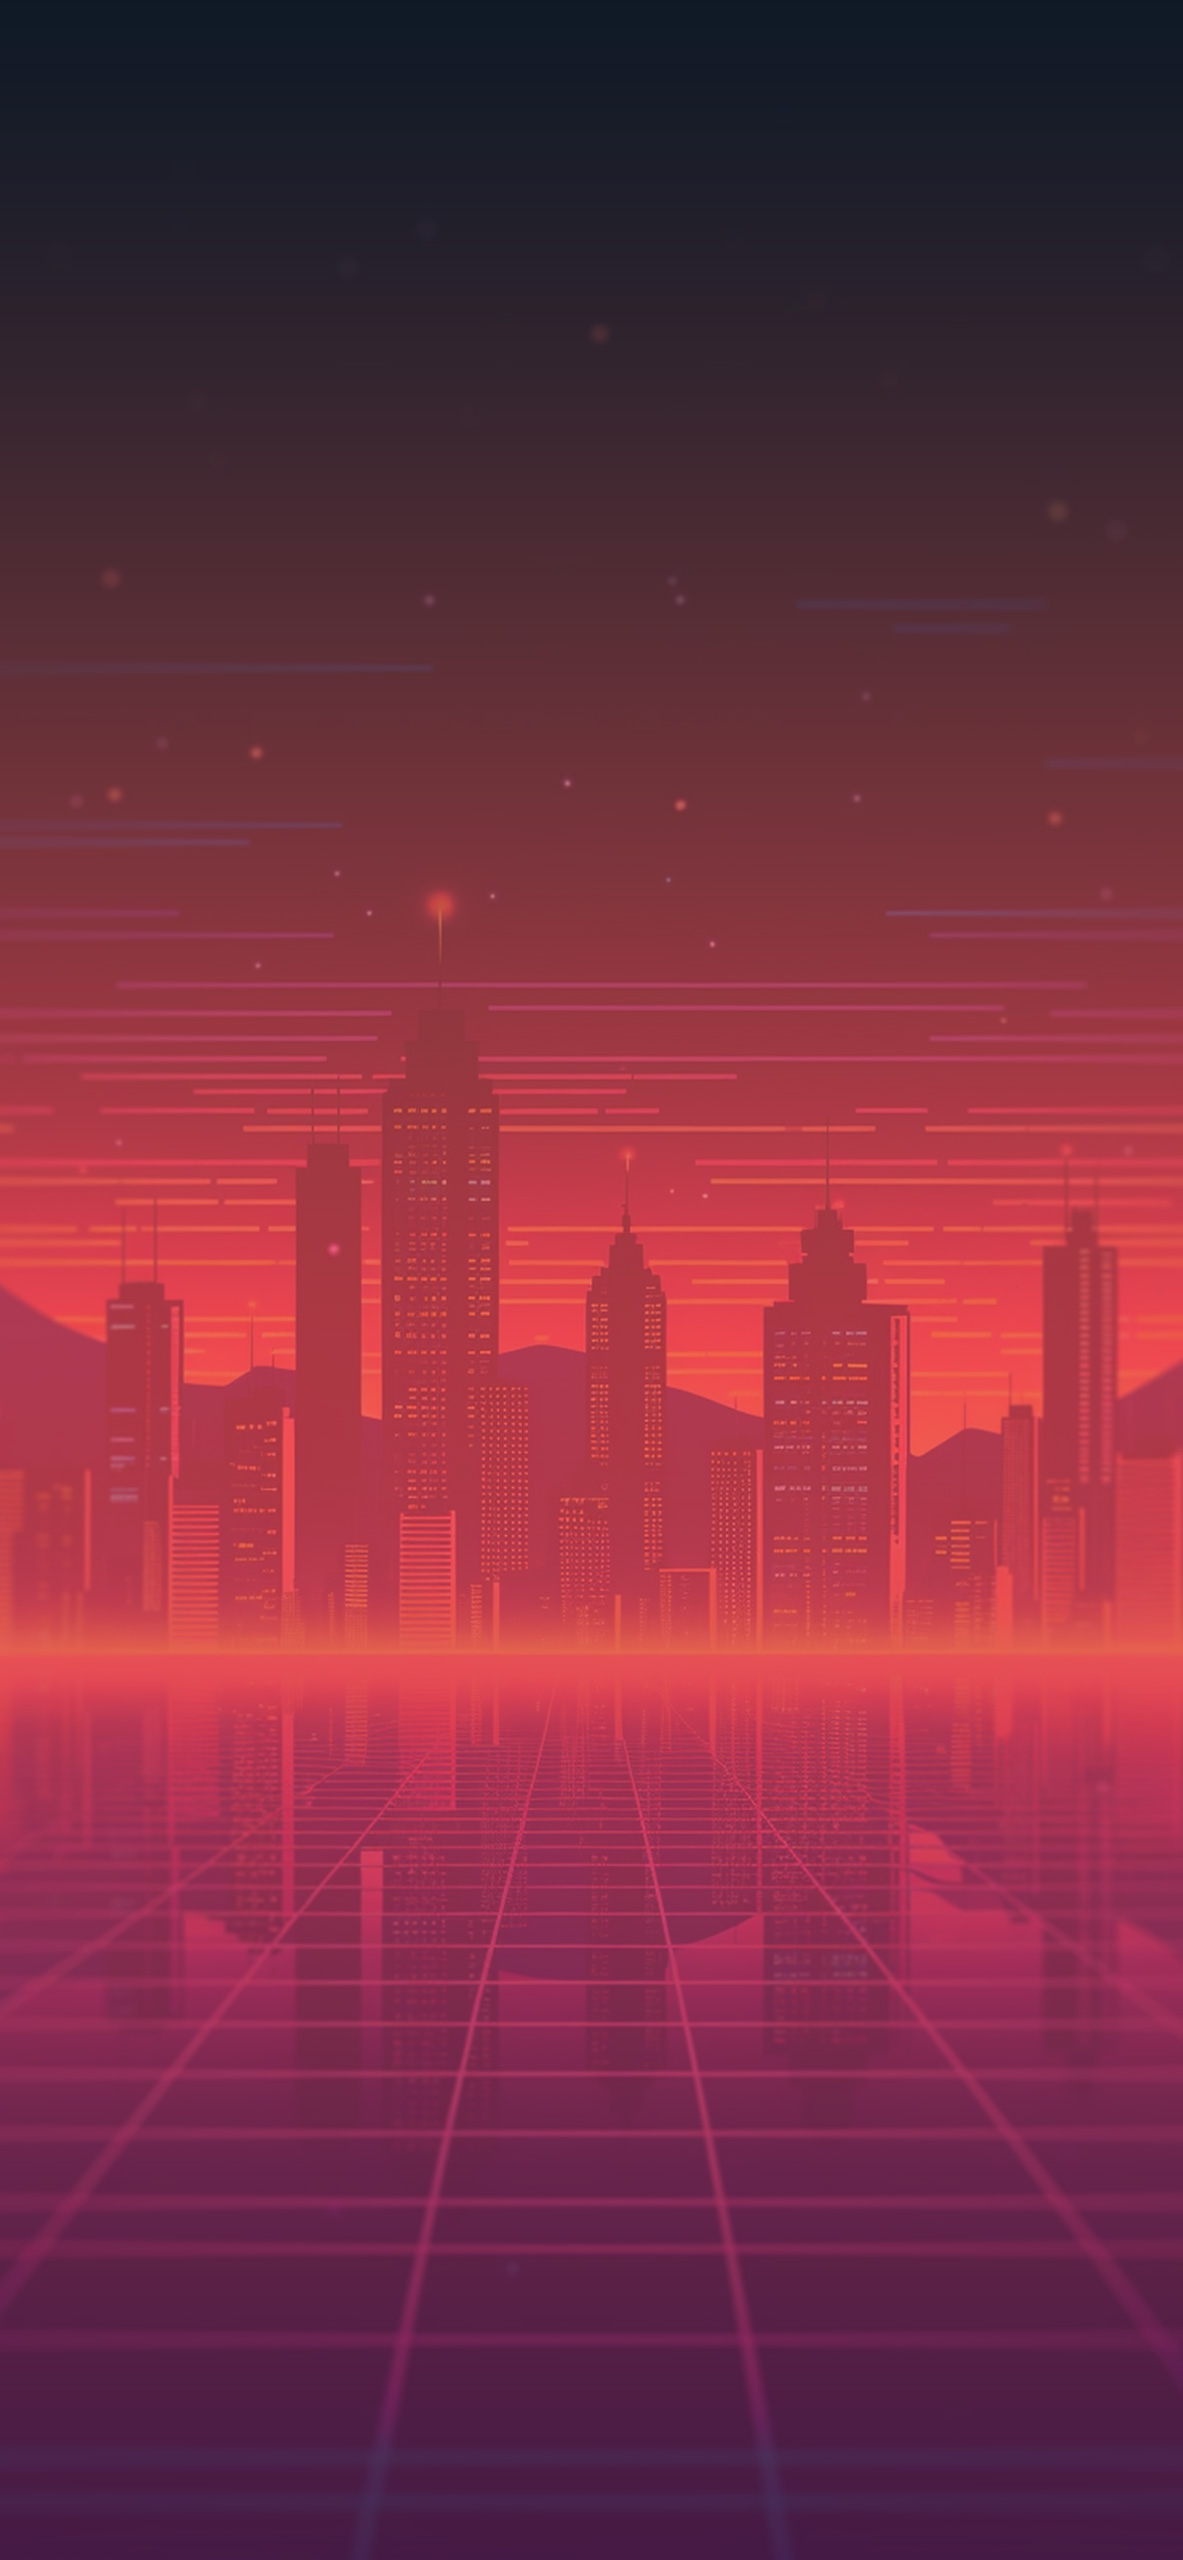 Crowded Neon City Street Live Wallpaper  free download